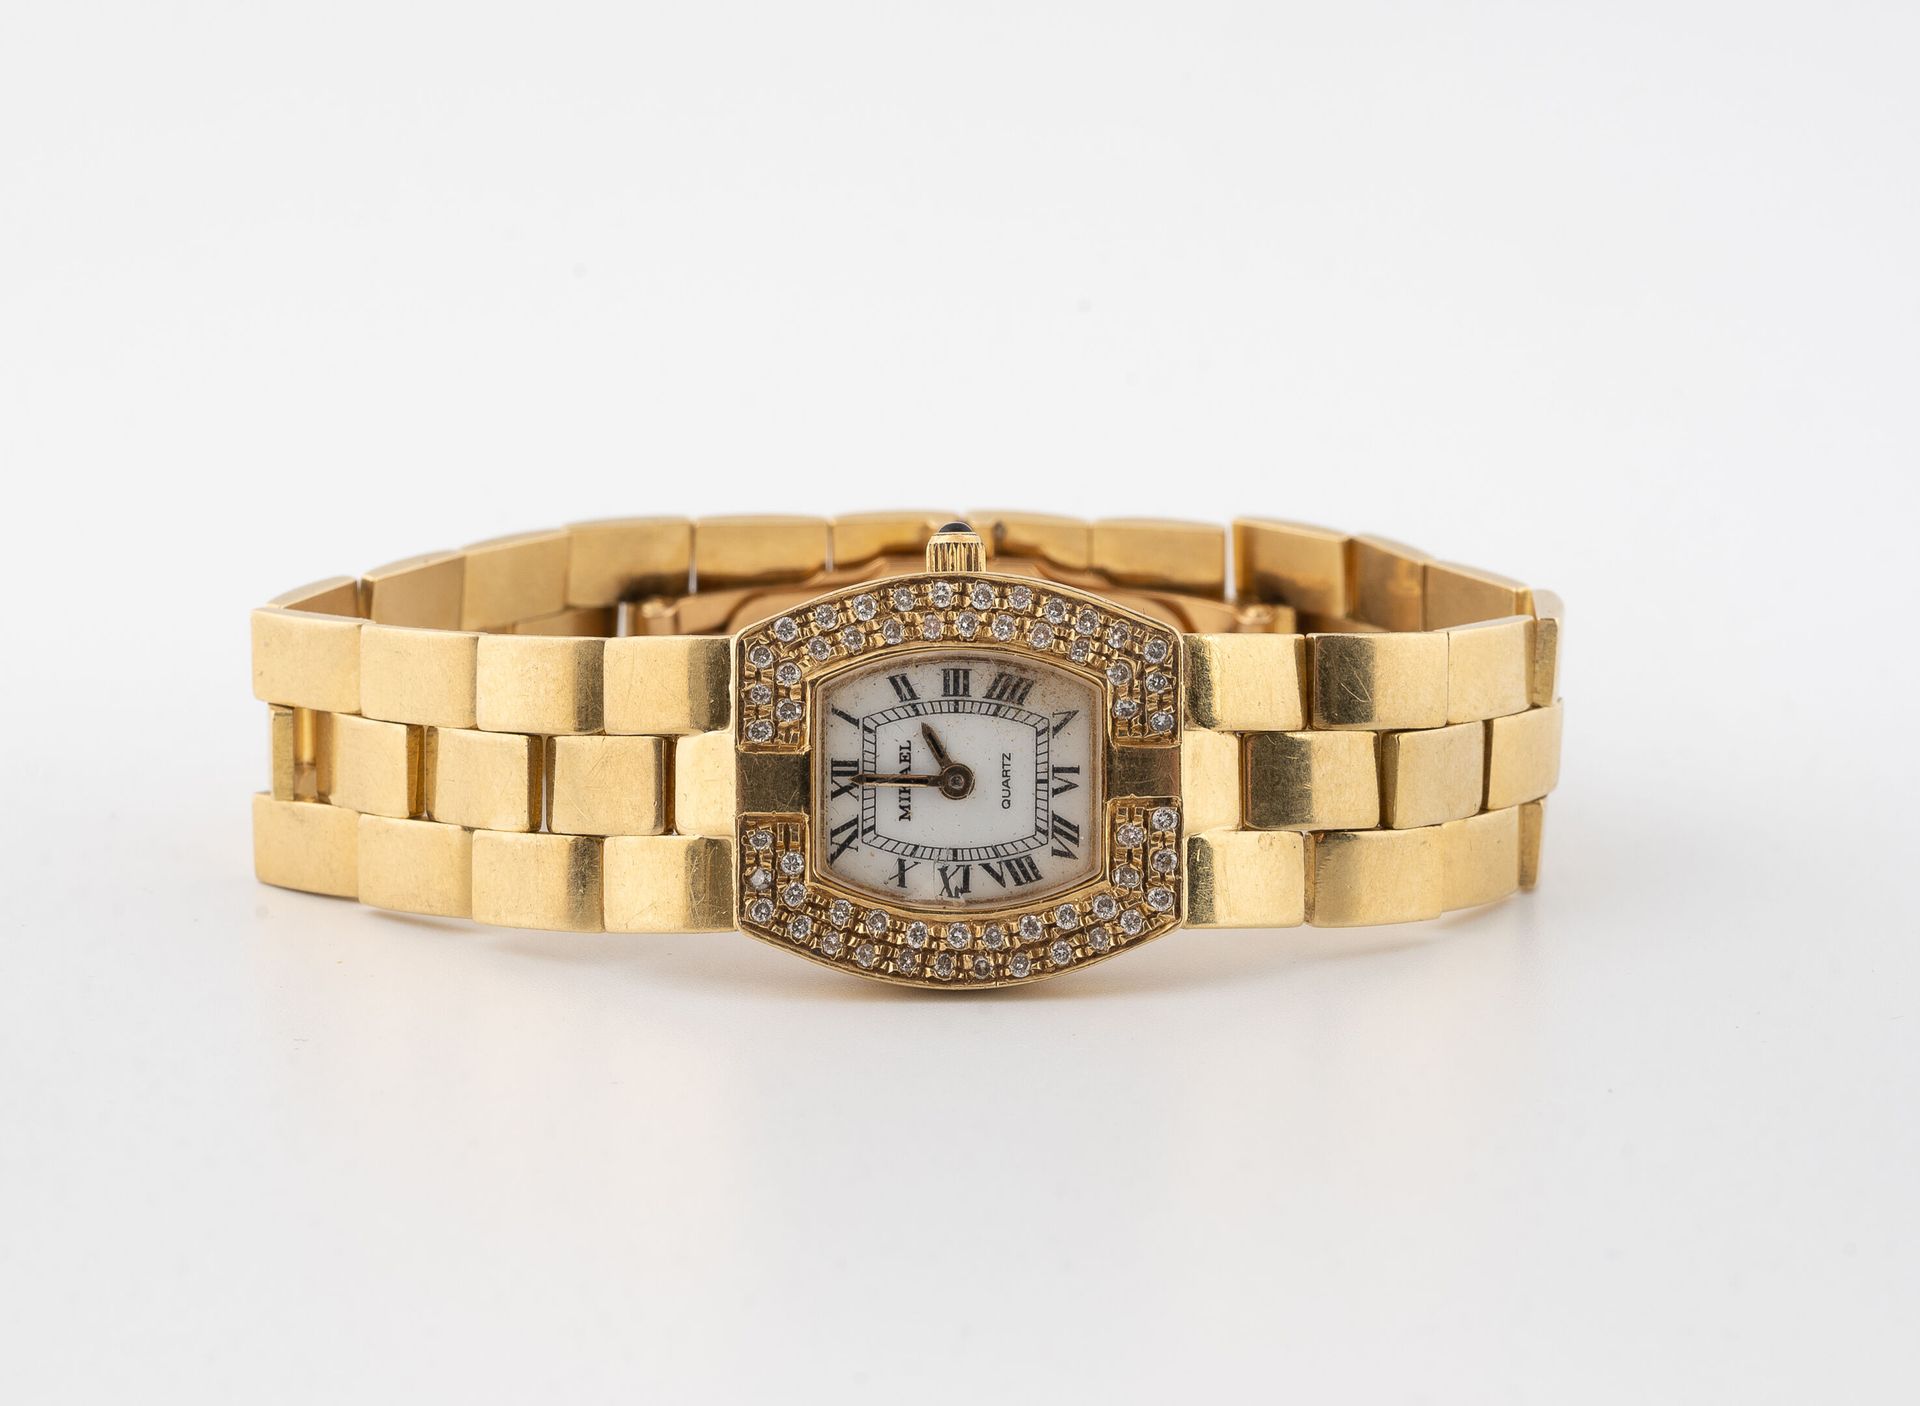 MIKAEL Lady's wristwatch in yellow gold (750).
Barrel case, bezel paved with sma&hellip;